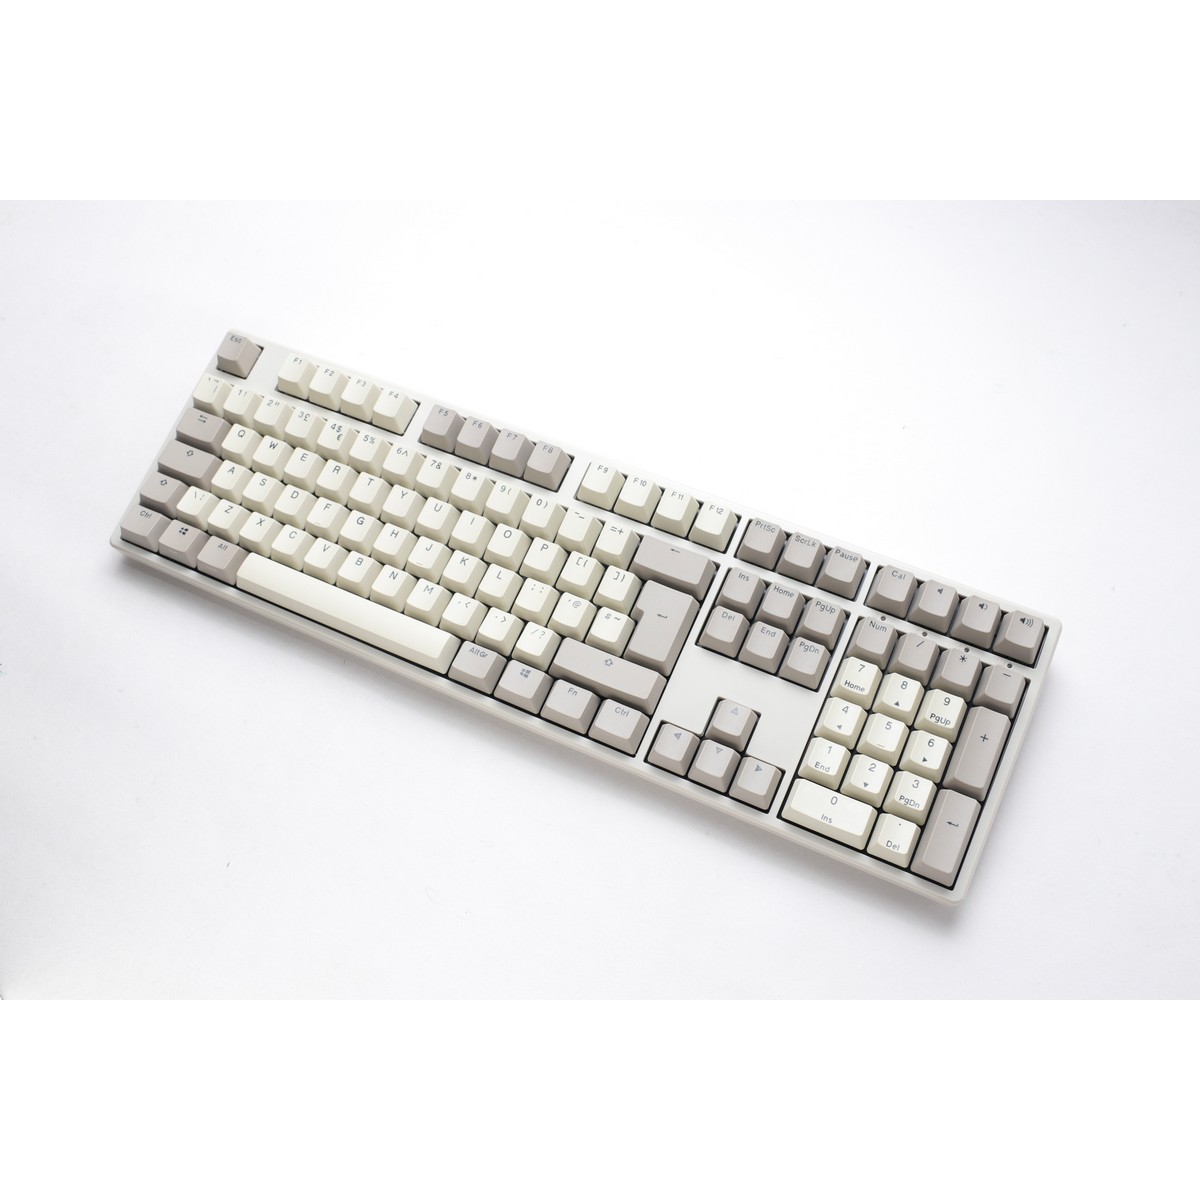 Ducky - Ducky Origin USB Mechanical Gaming Keyboard Cherry MX Red - Vintage UK Layout